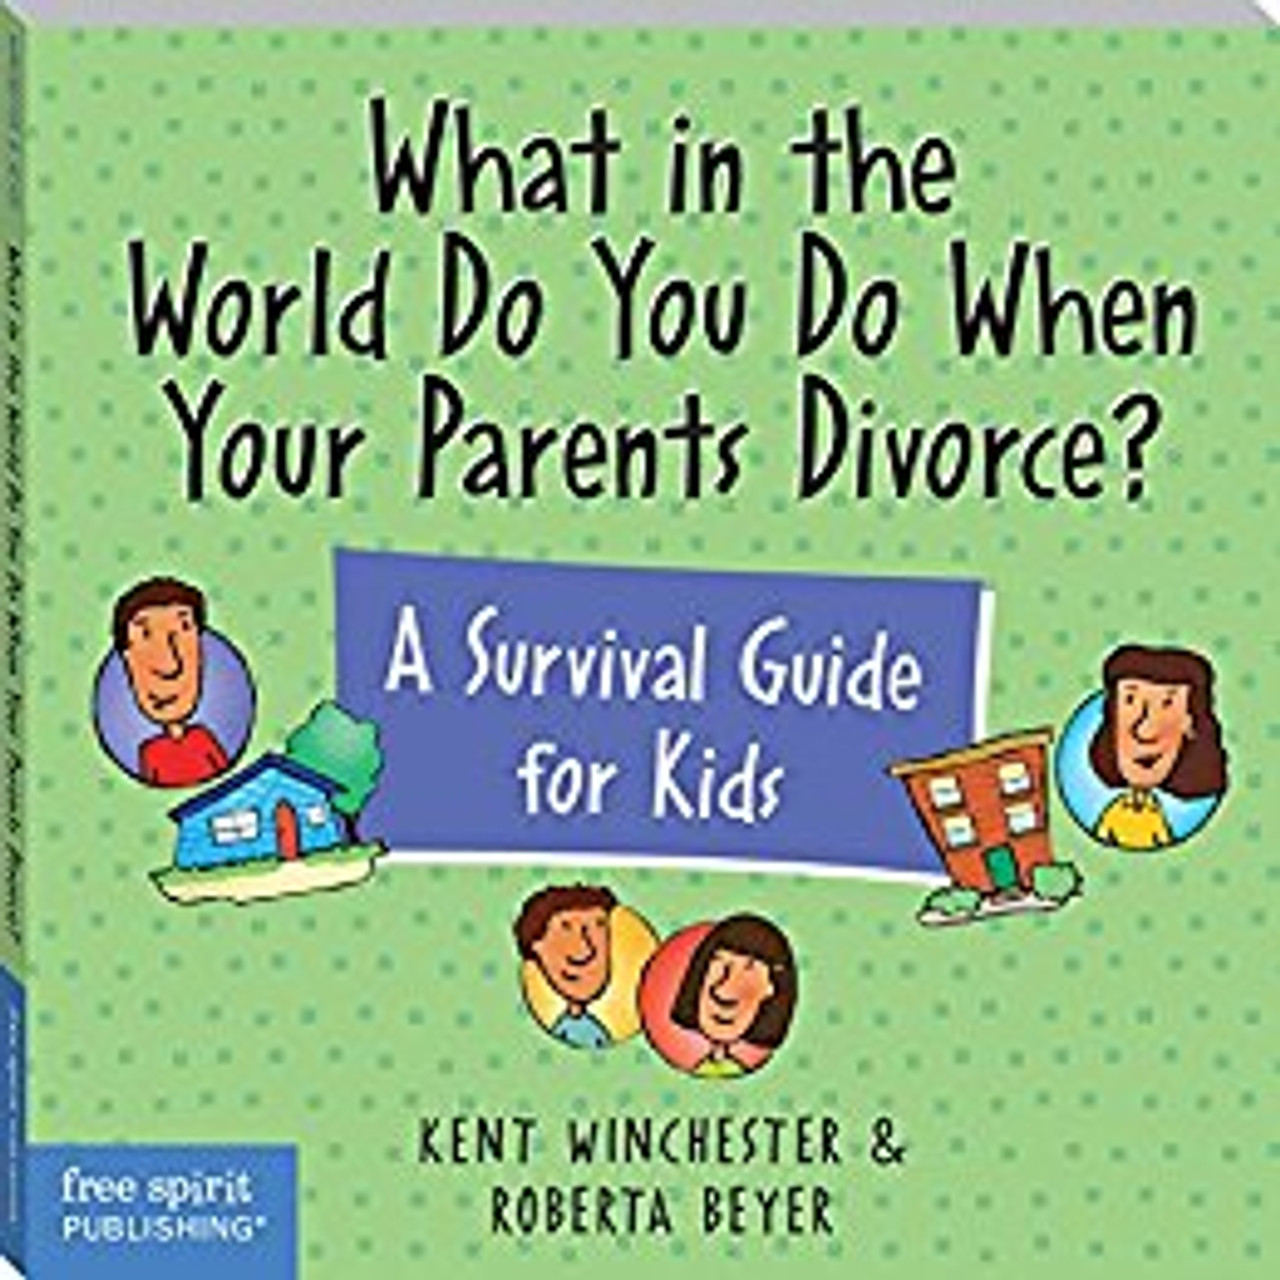 What in the World Do You Do When Your Parents Divorce? A Survival Guide For Kids by Kent Winchester